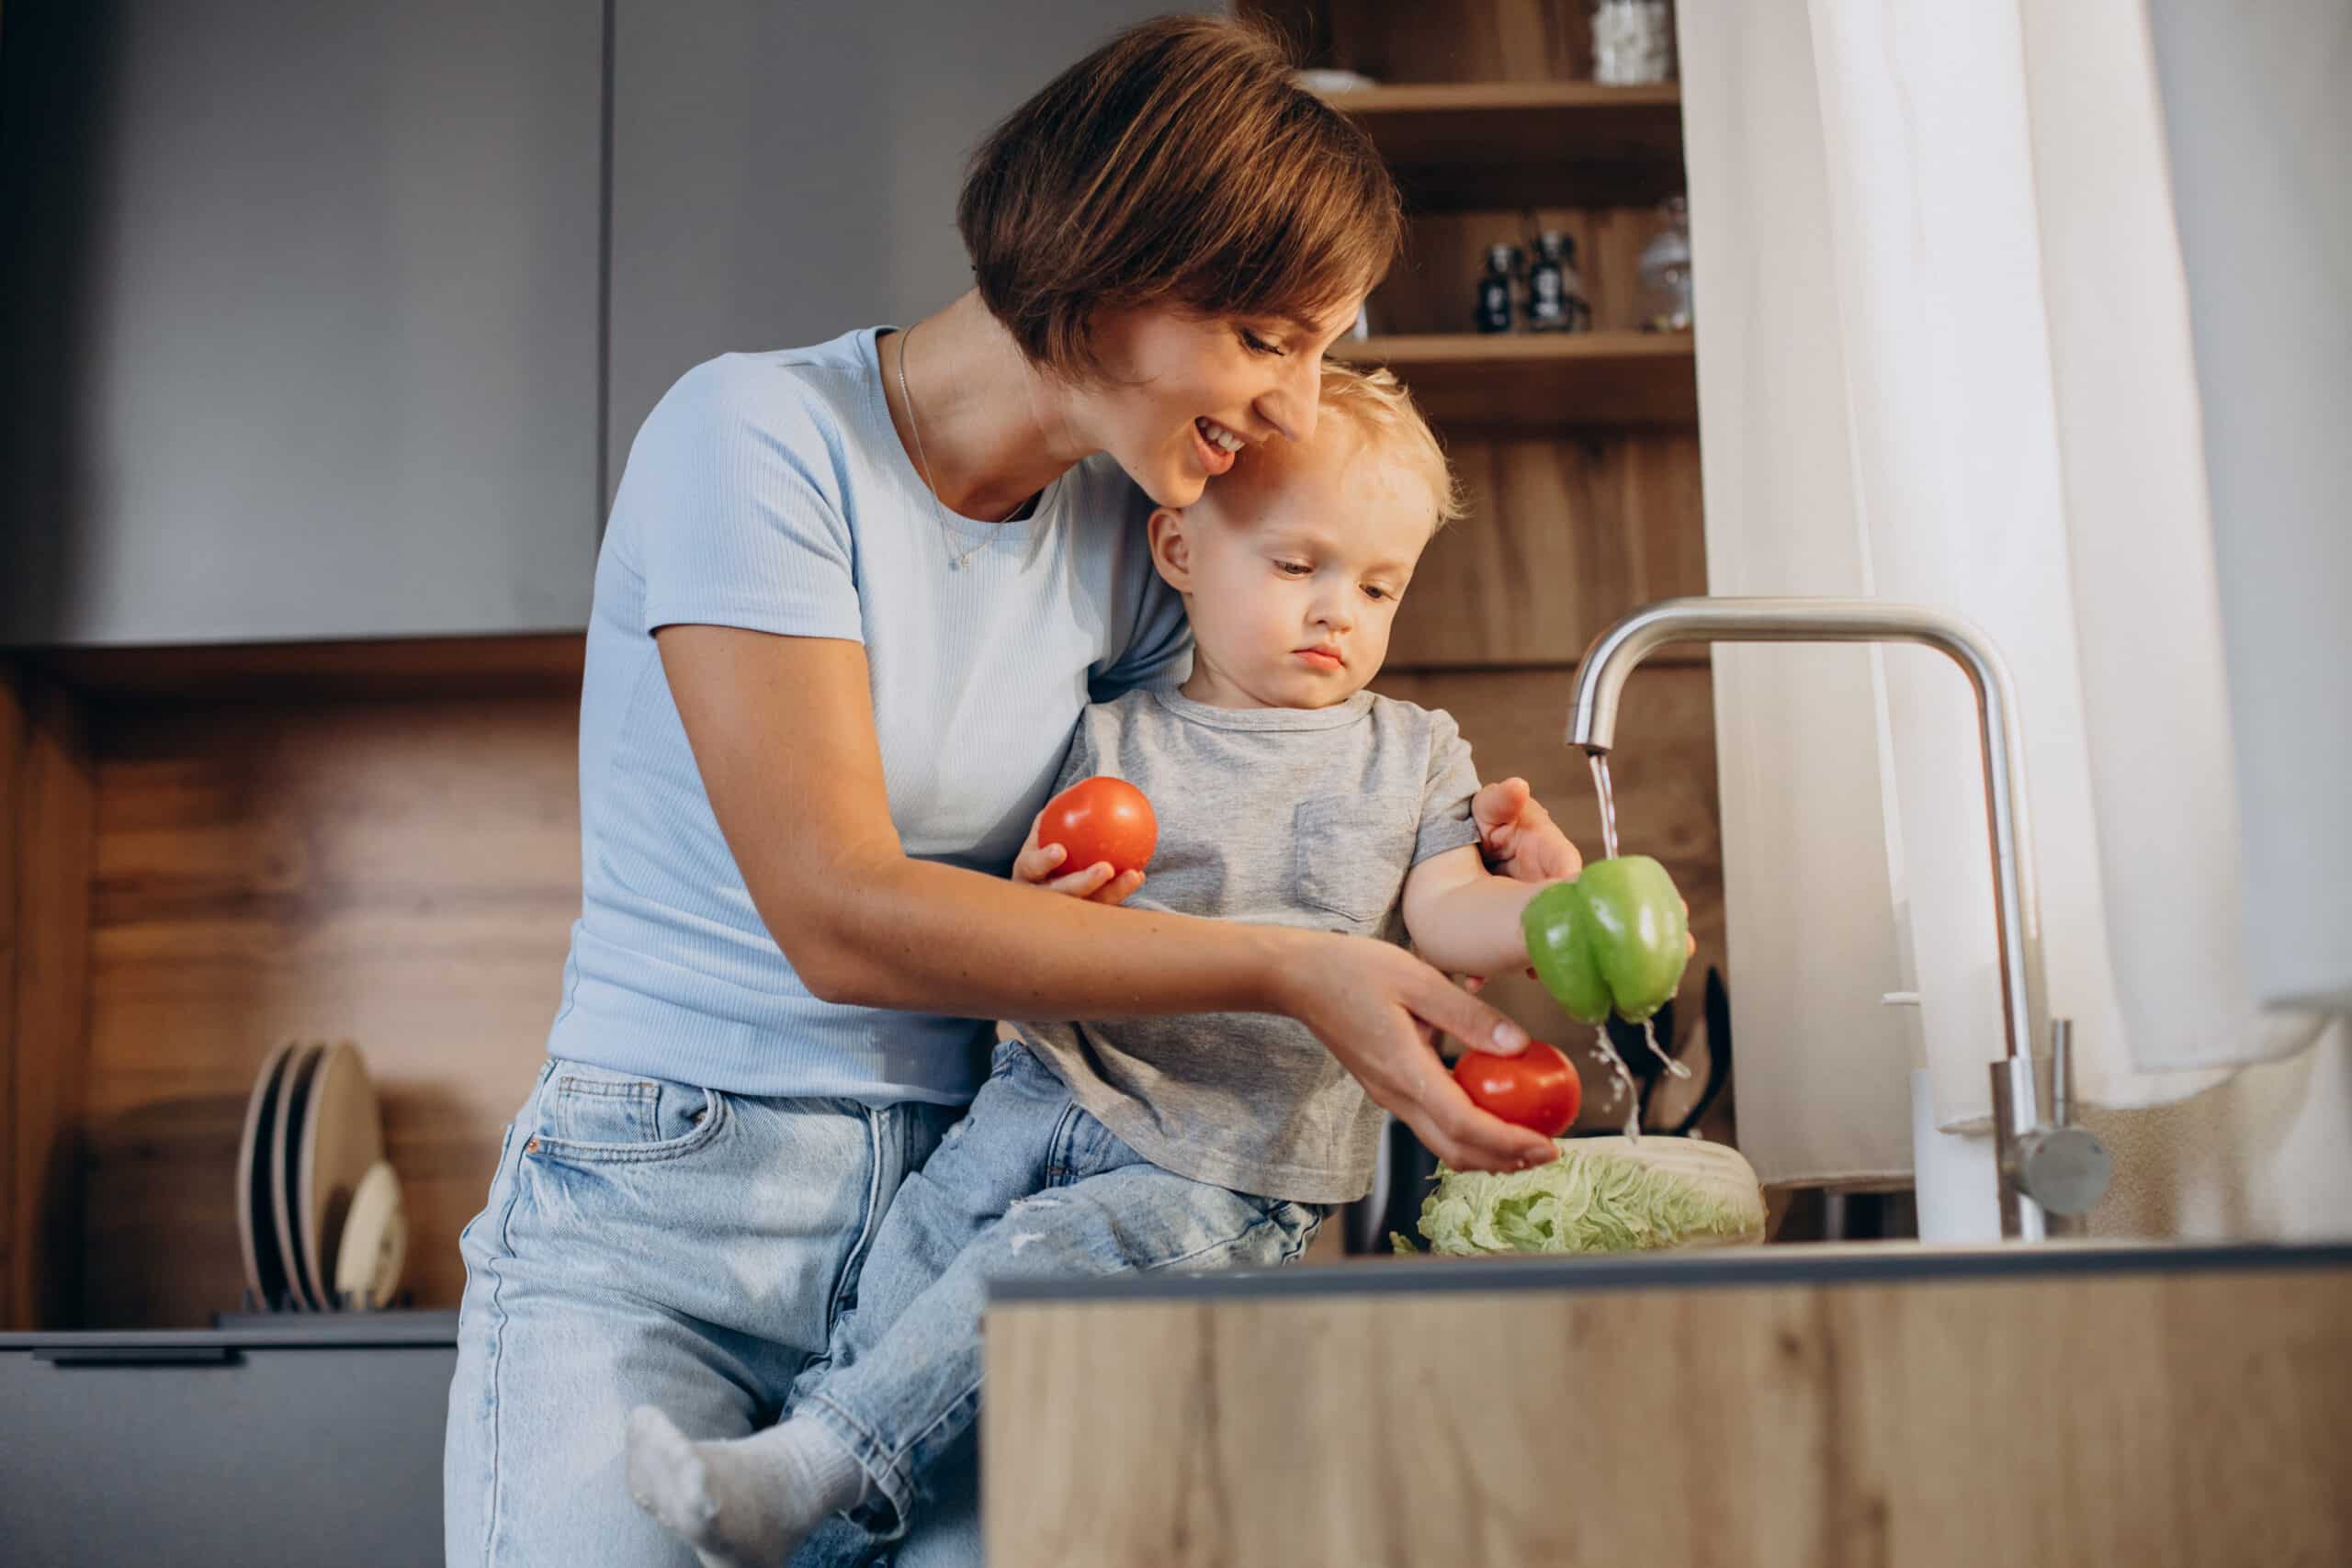 Woman with her son washing vegetables in the kitchen sink